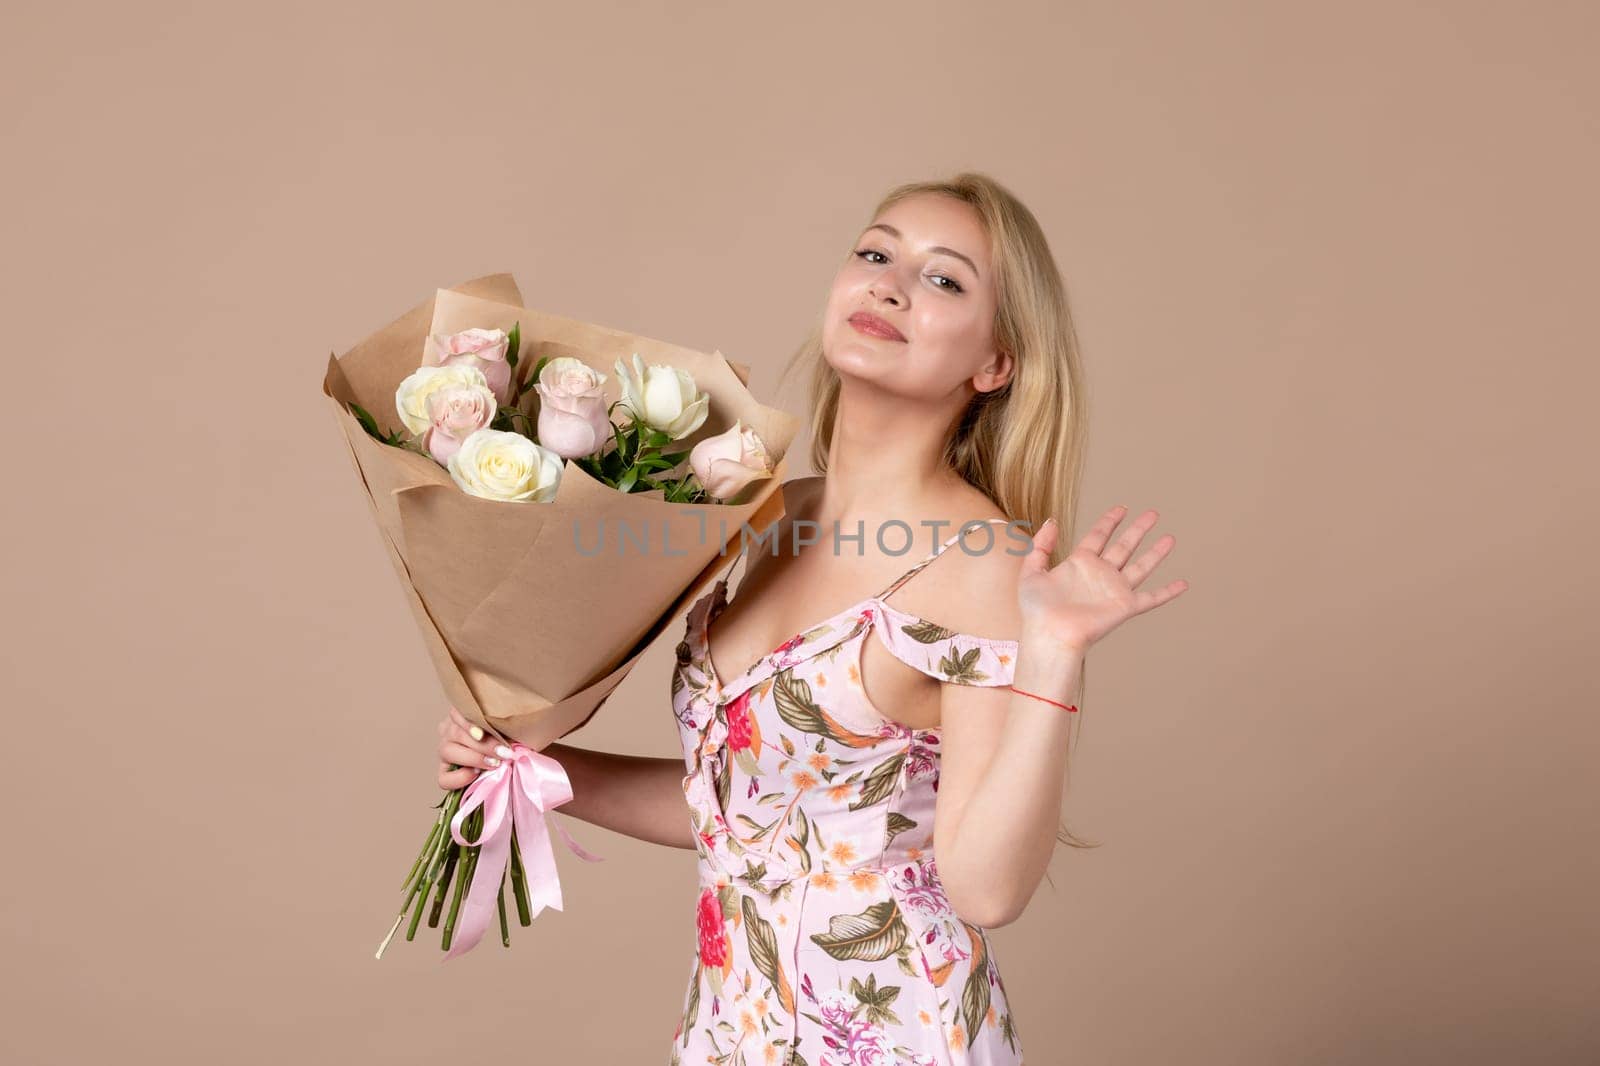 front view young female posing with bouquet of beautiful roses on brown background feminine sensual woman march gift marriage equality by Kamran